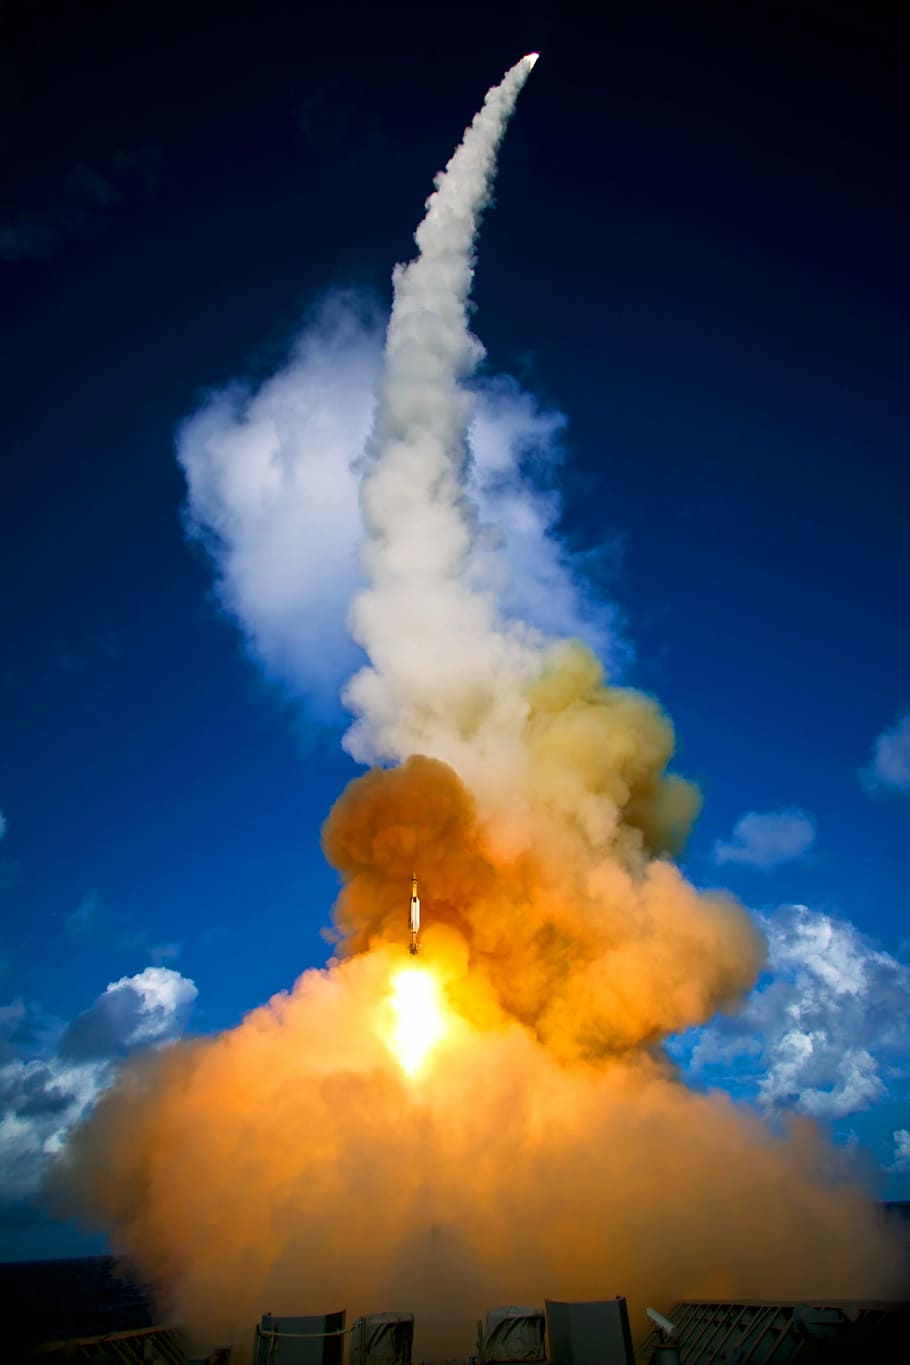 rocket, flying, smoke, ship to air, blast off, fire, flames, outside, outdoor, sky